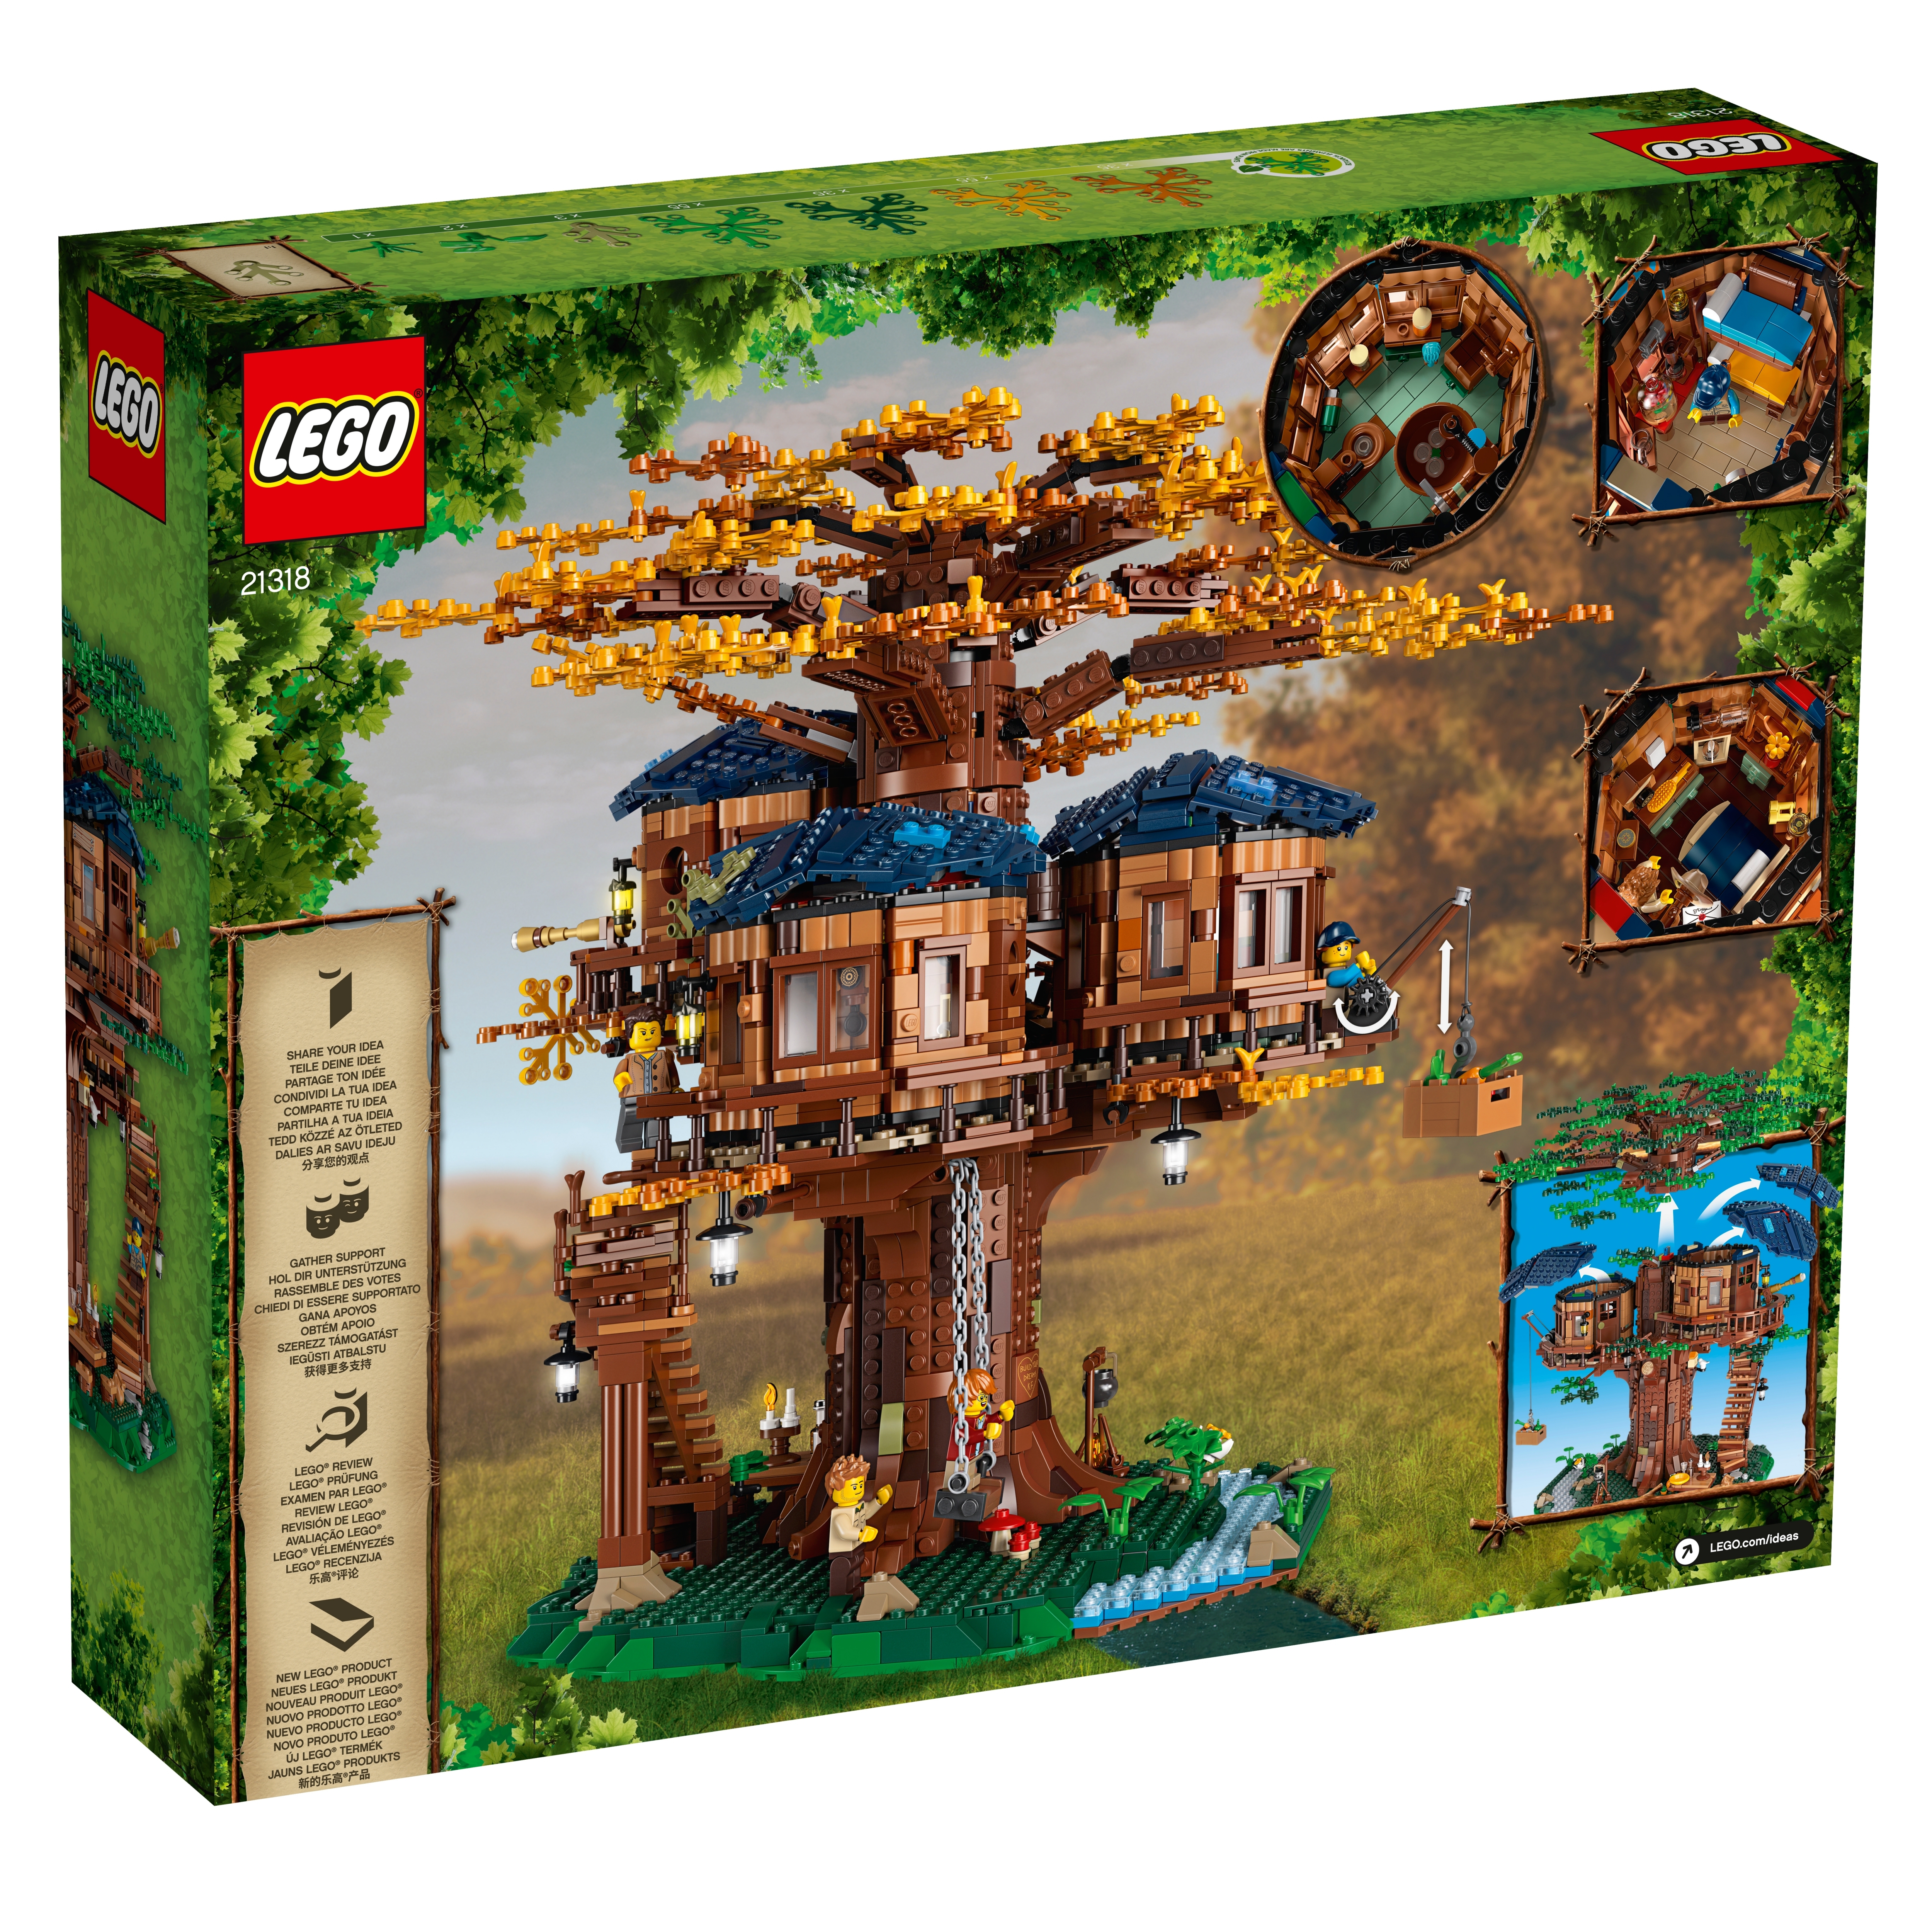 LEGO Ideas Tree House 21318 3036 Pieces Complete UNOPENED BAGS NO Box 